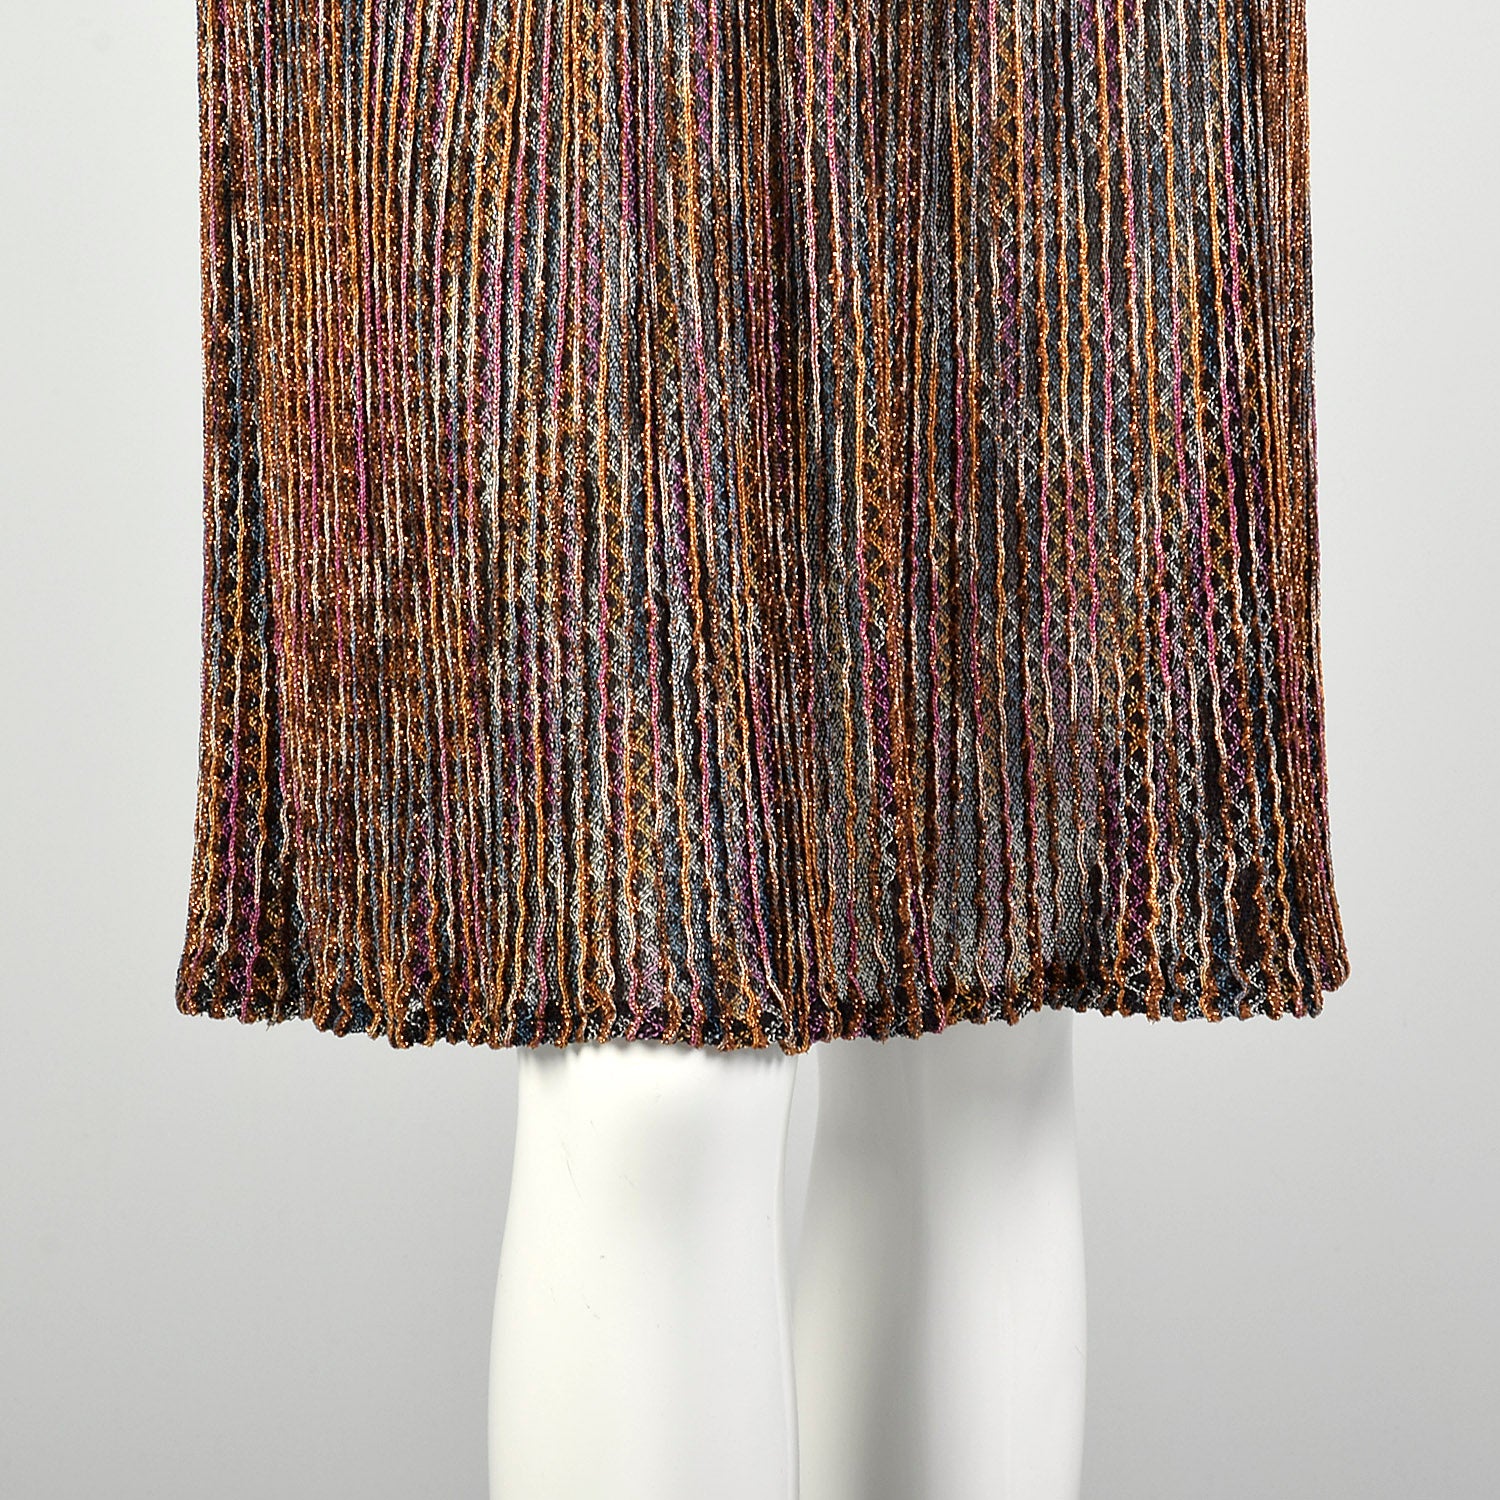 Small 1980s Dress Missoni Metallic Knit Knee Length Long Sleeve Sweater Party